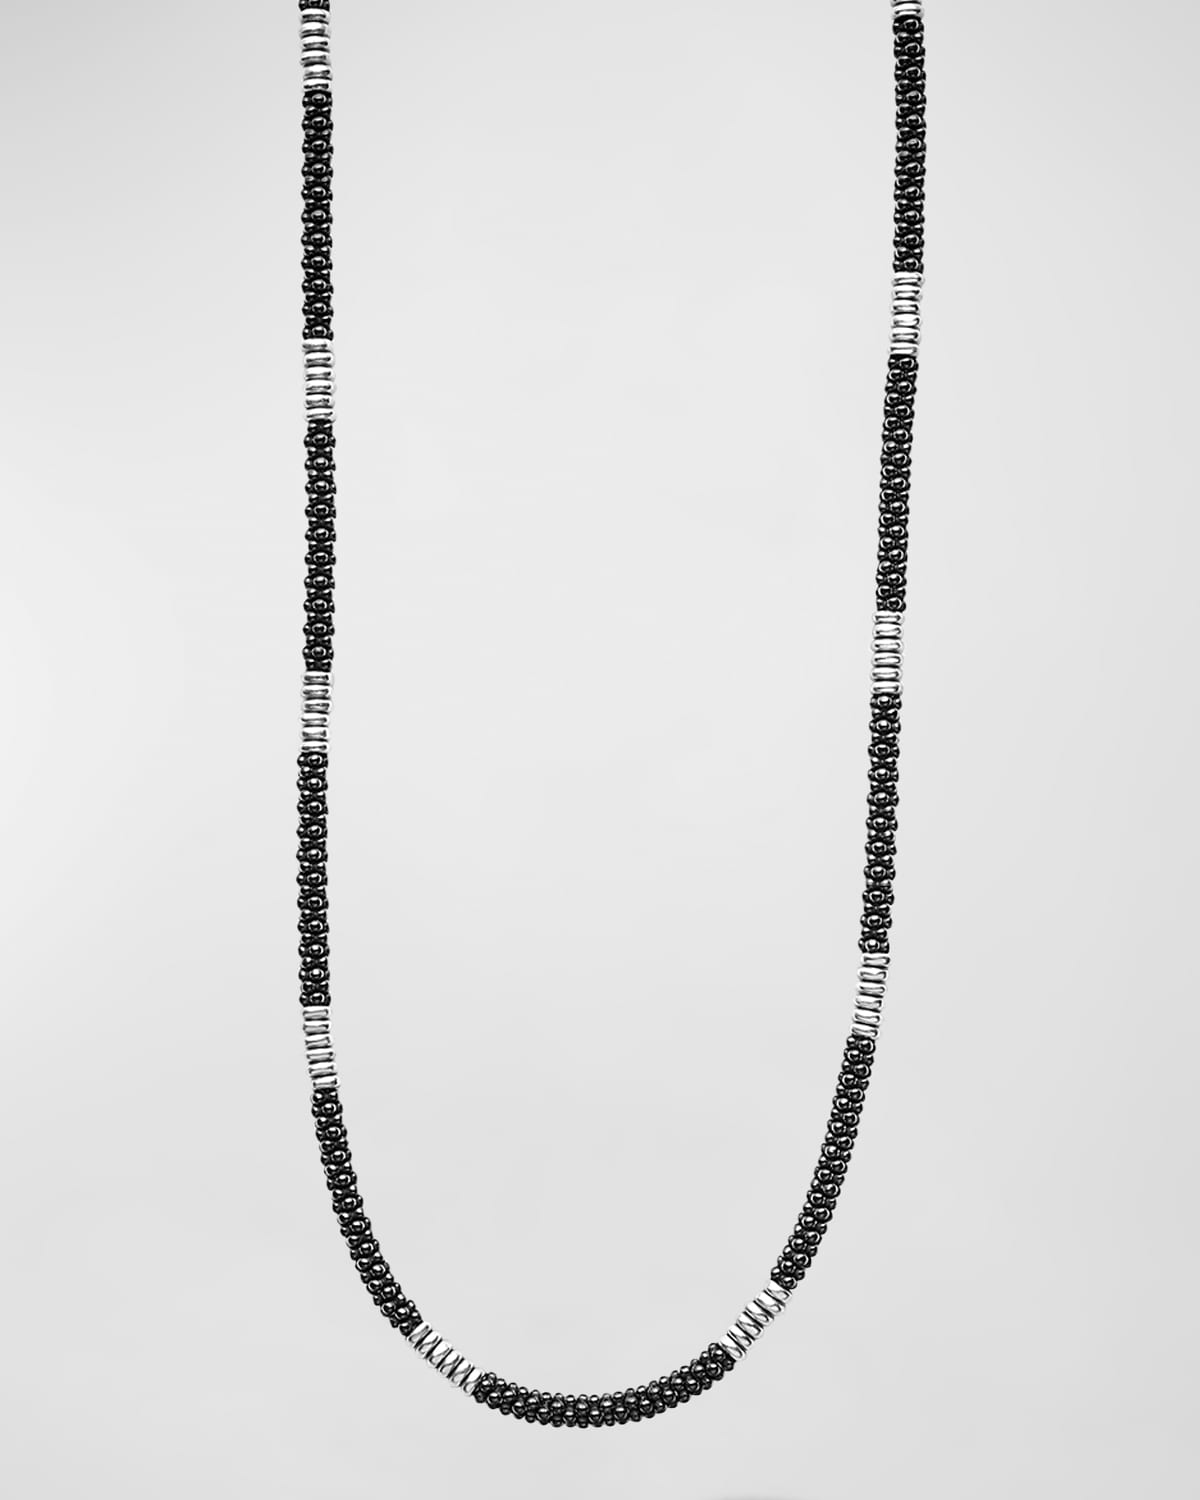 LAGOS STERLING SILVER BLACK CAVIAR BEADED NECKLACE